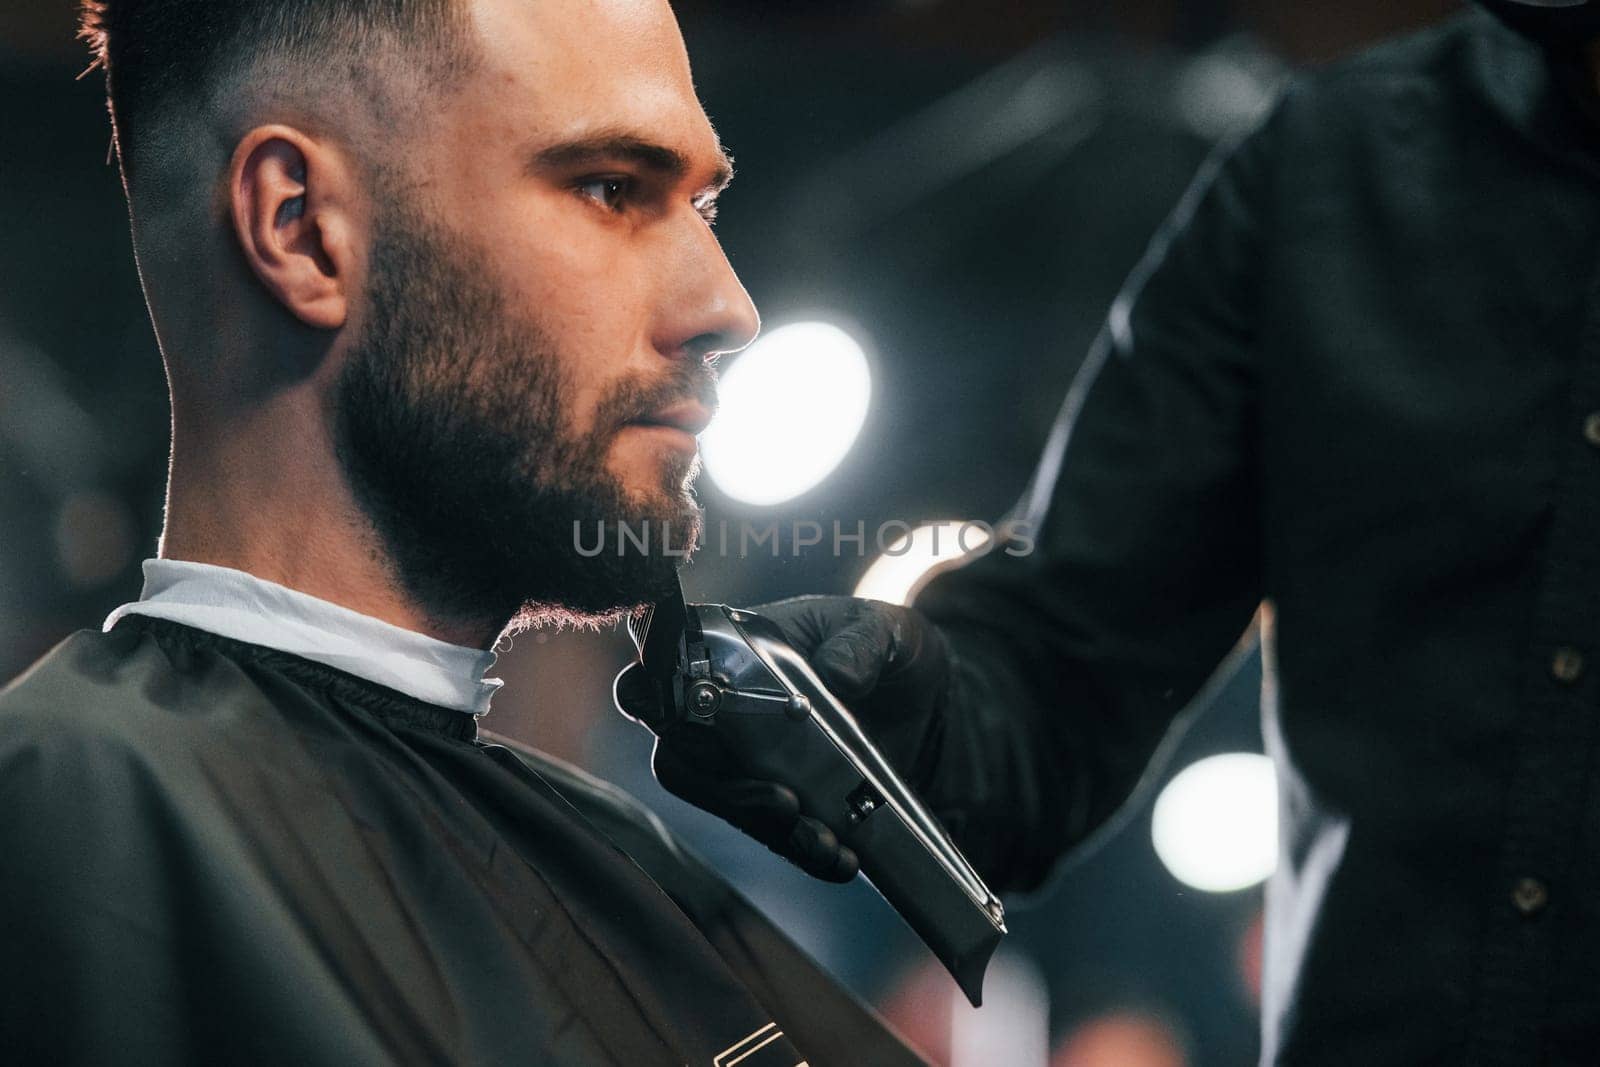 Young man with stylish hairstyle sitting and getting his beard shaved in barber shop by Standret